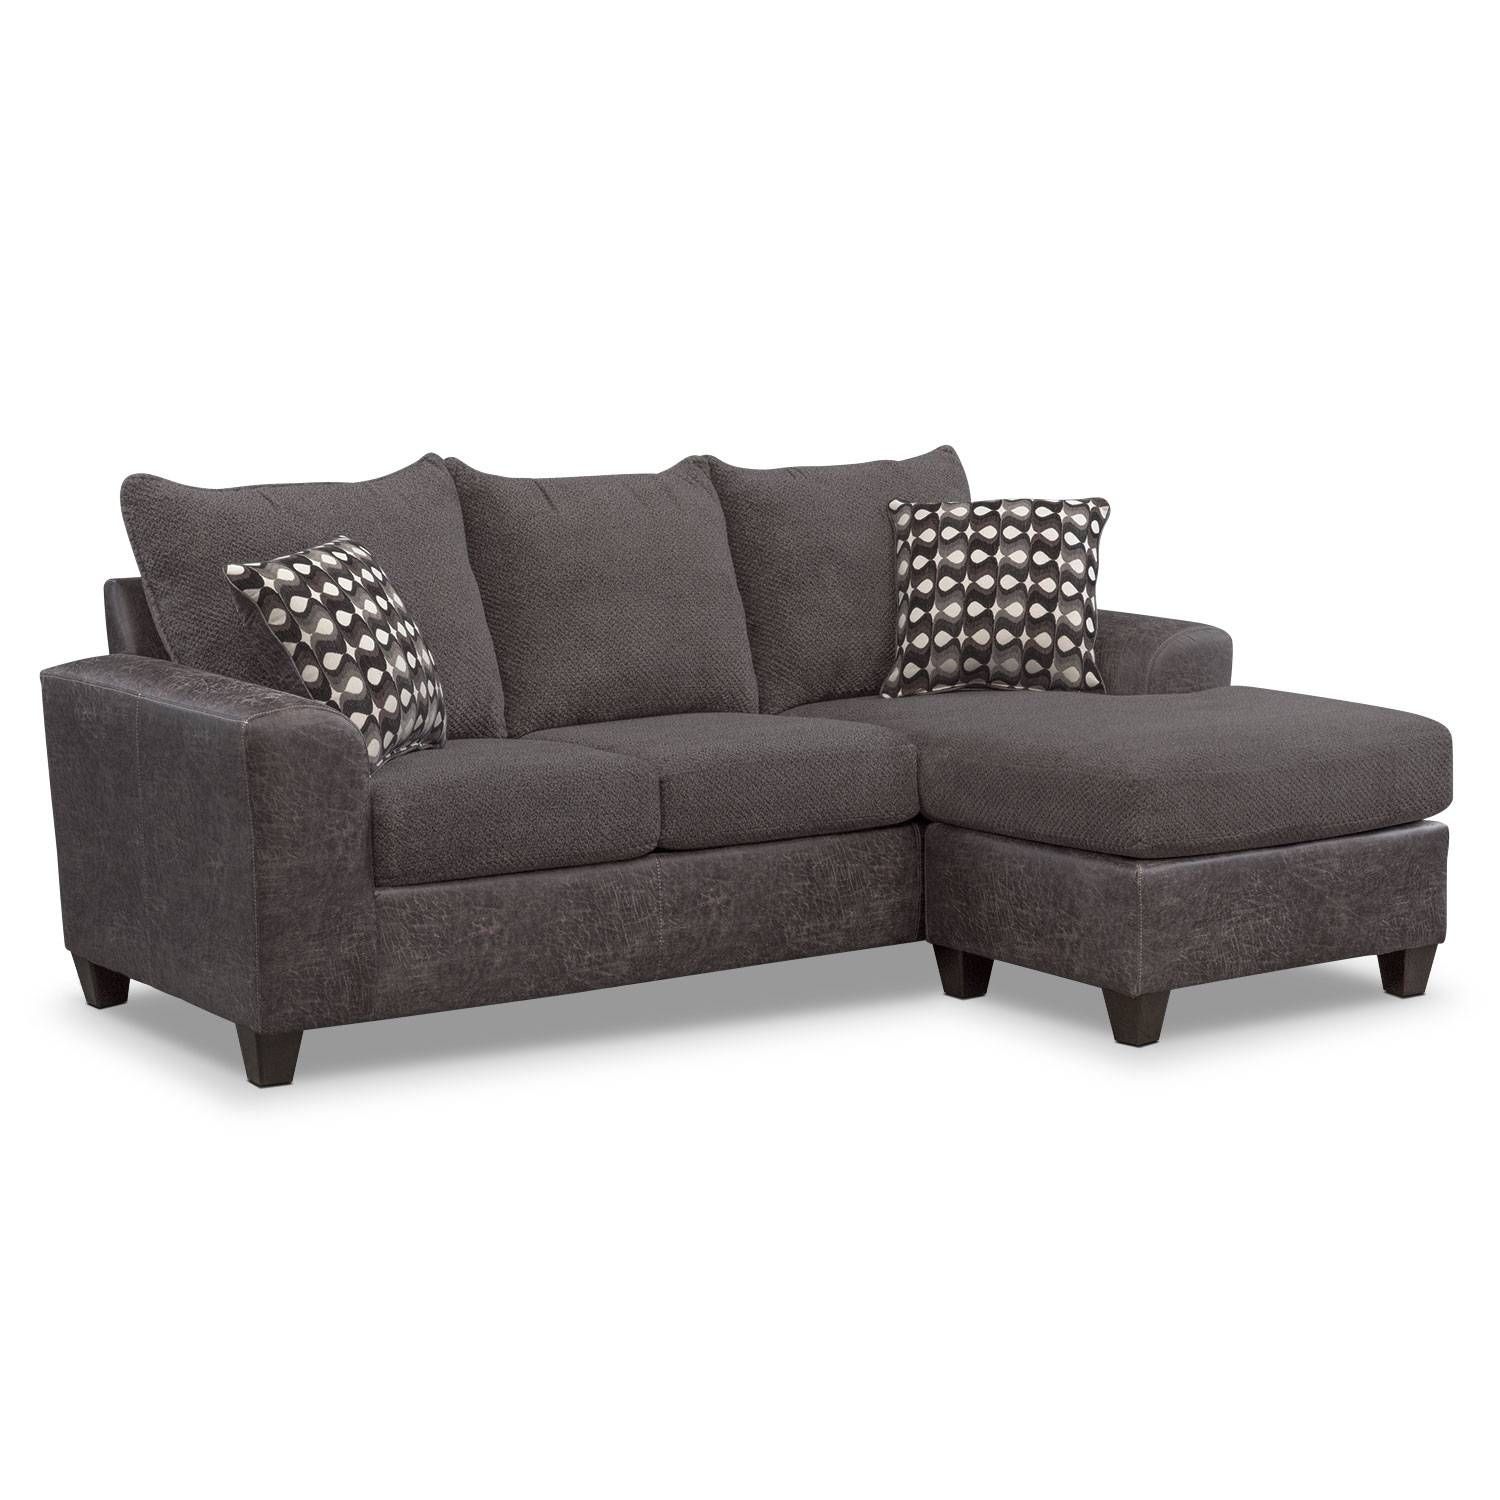 Sofas & Couches | Living Room Seating | Value City Furniture In Sofas With High Backs (Photo 8 of 30)